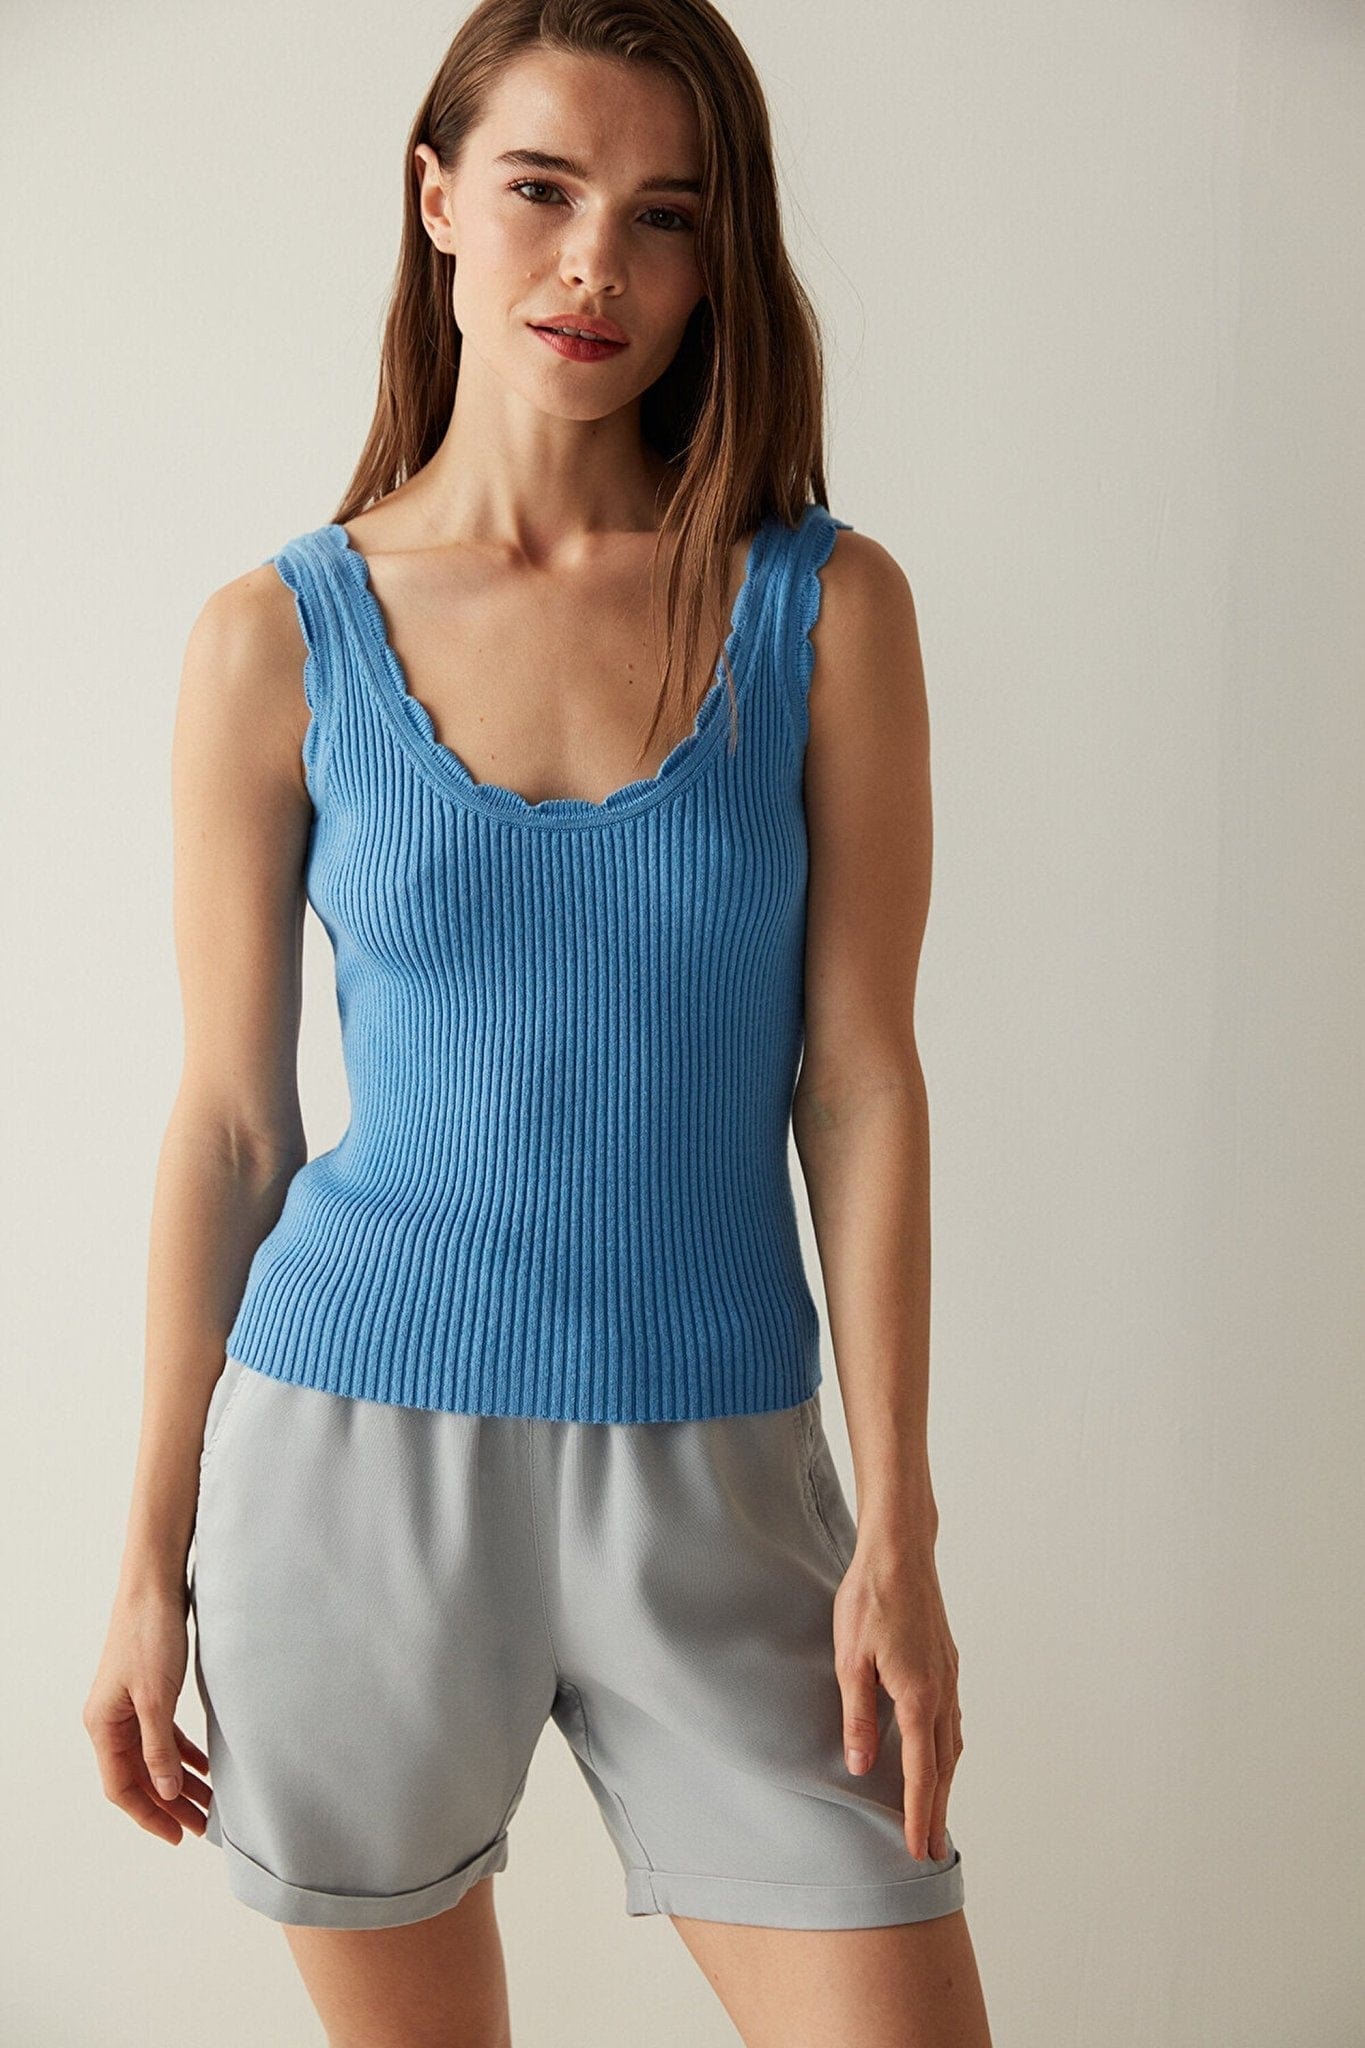 Blue Tricot Top with Edge Detail XS / 2 FLEXISB